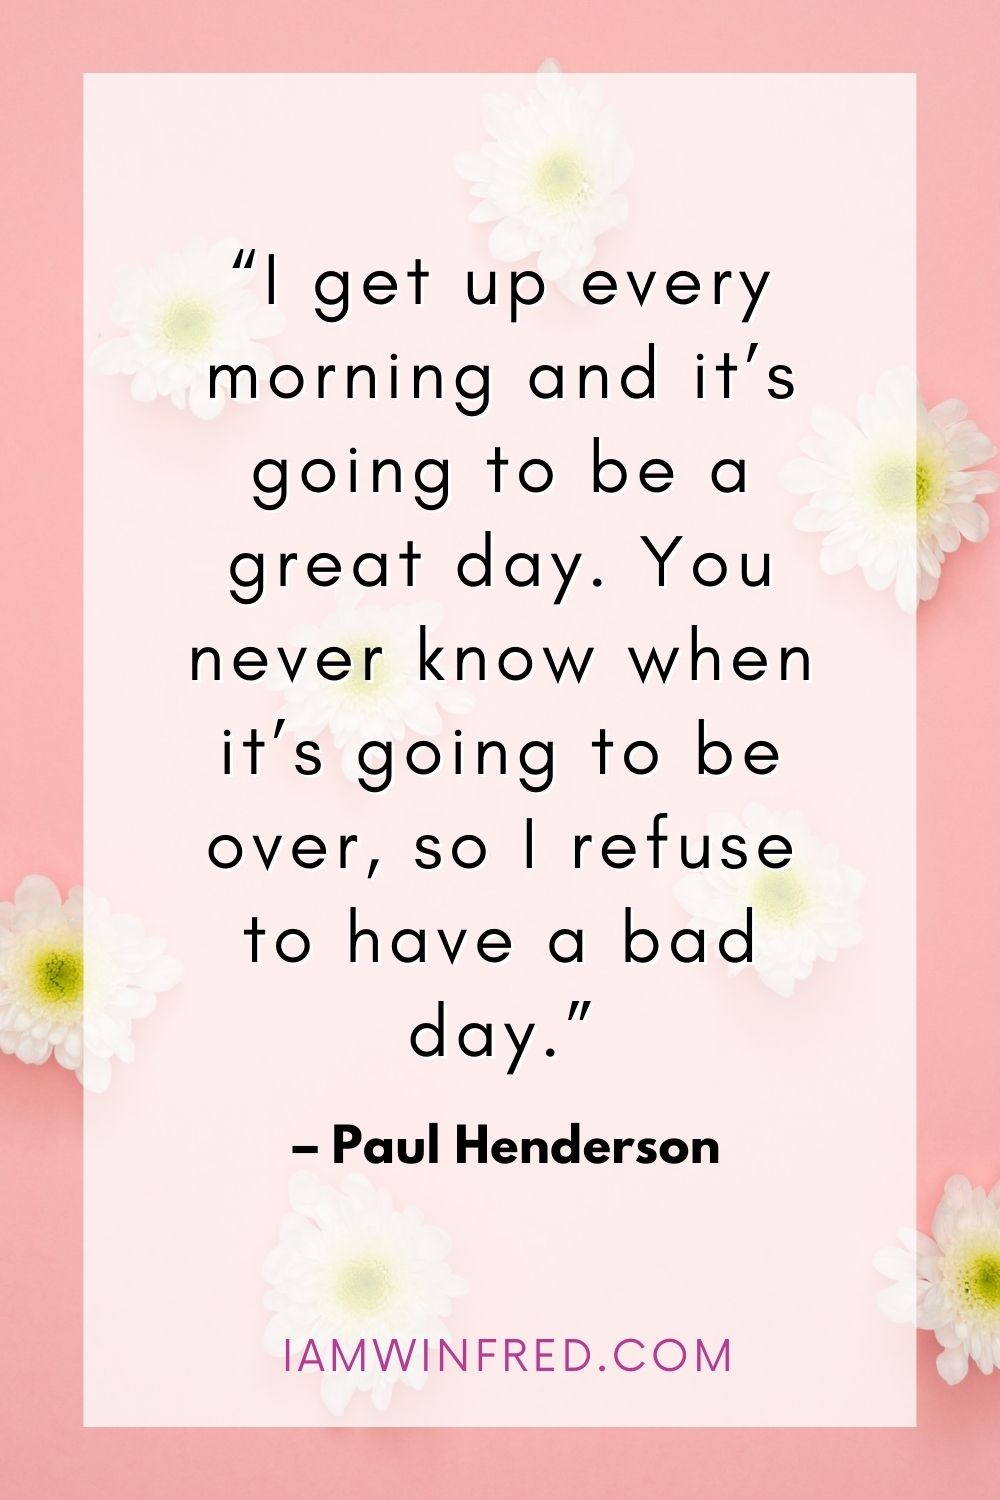 I Get Up Every Morning And Its Going To Be A Great Day. You Never Know When Its Going To Be Over So I Refuse To Have A Bad Day.